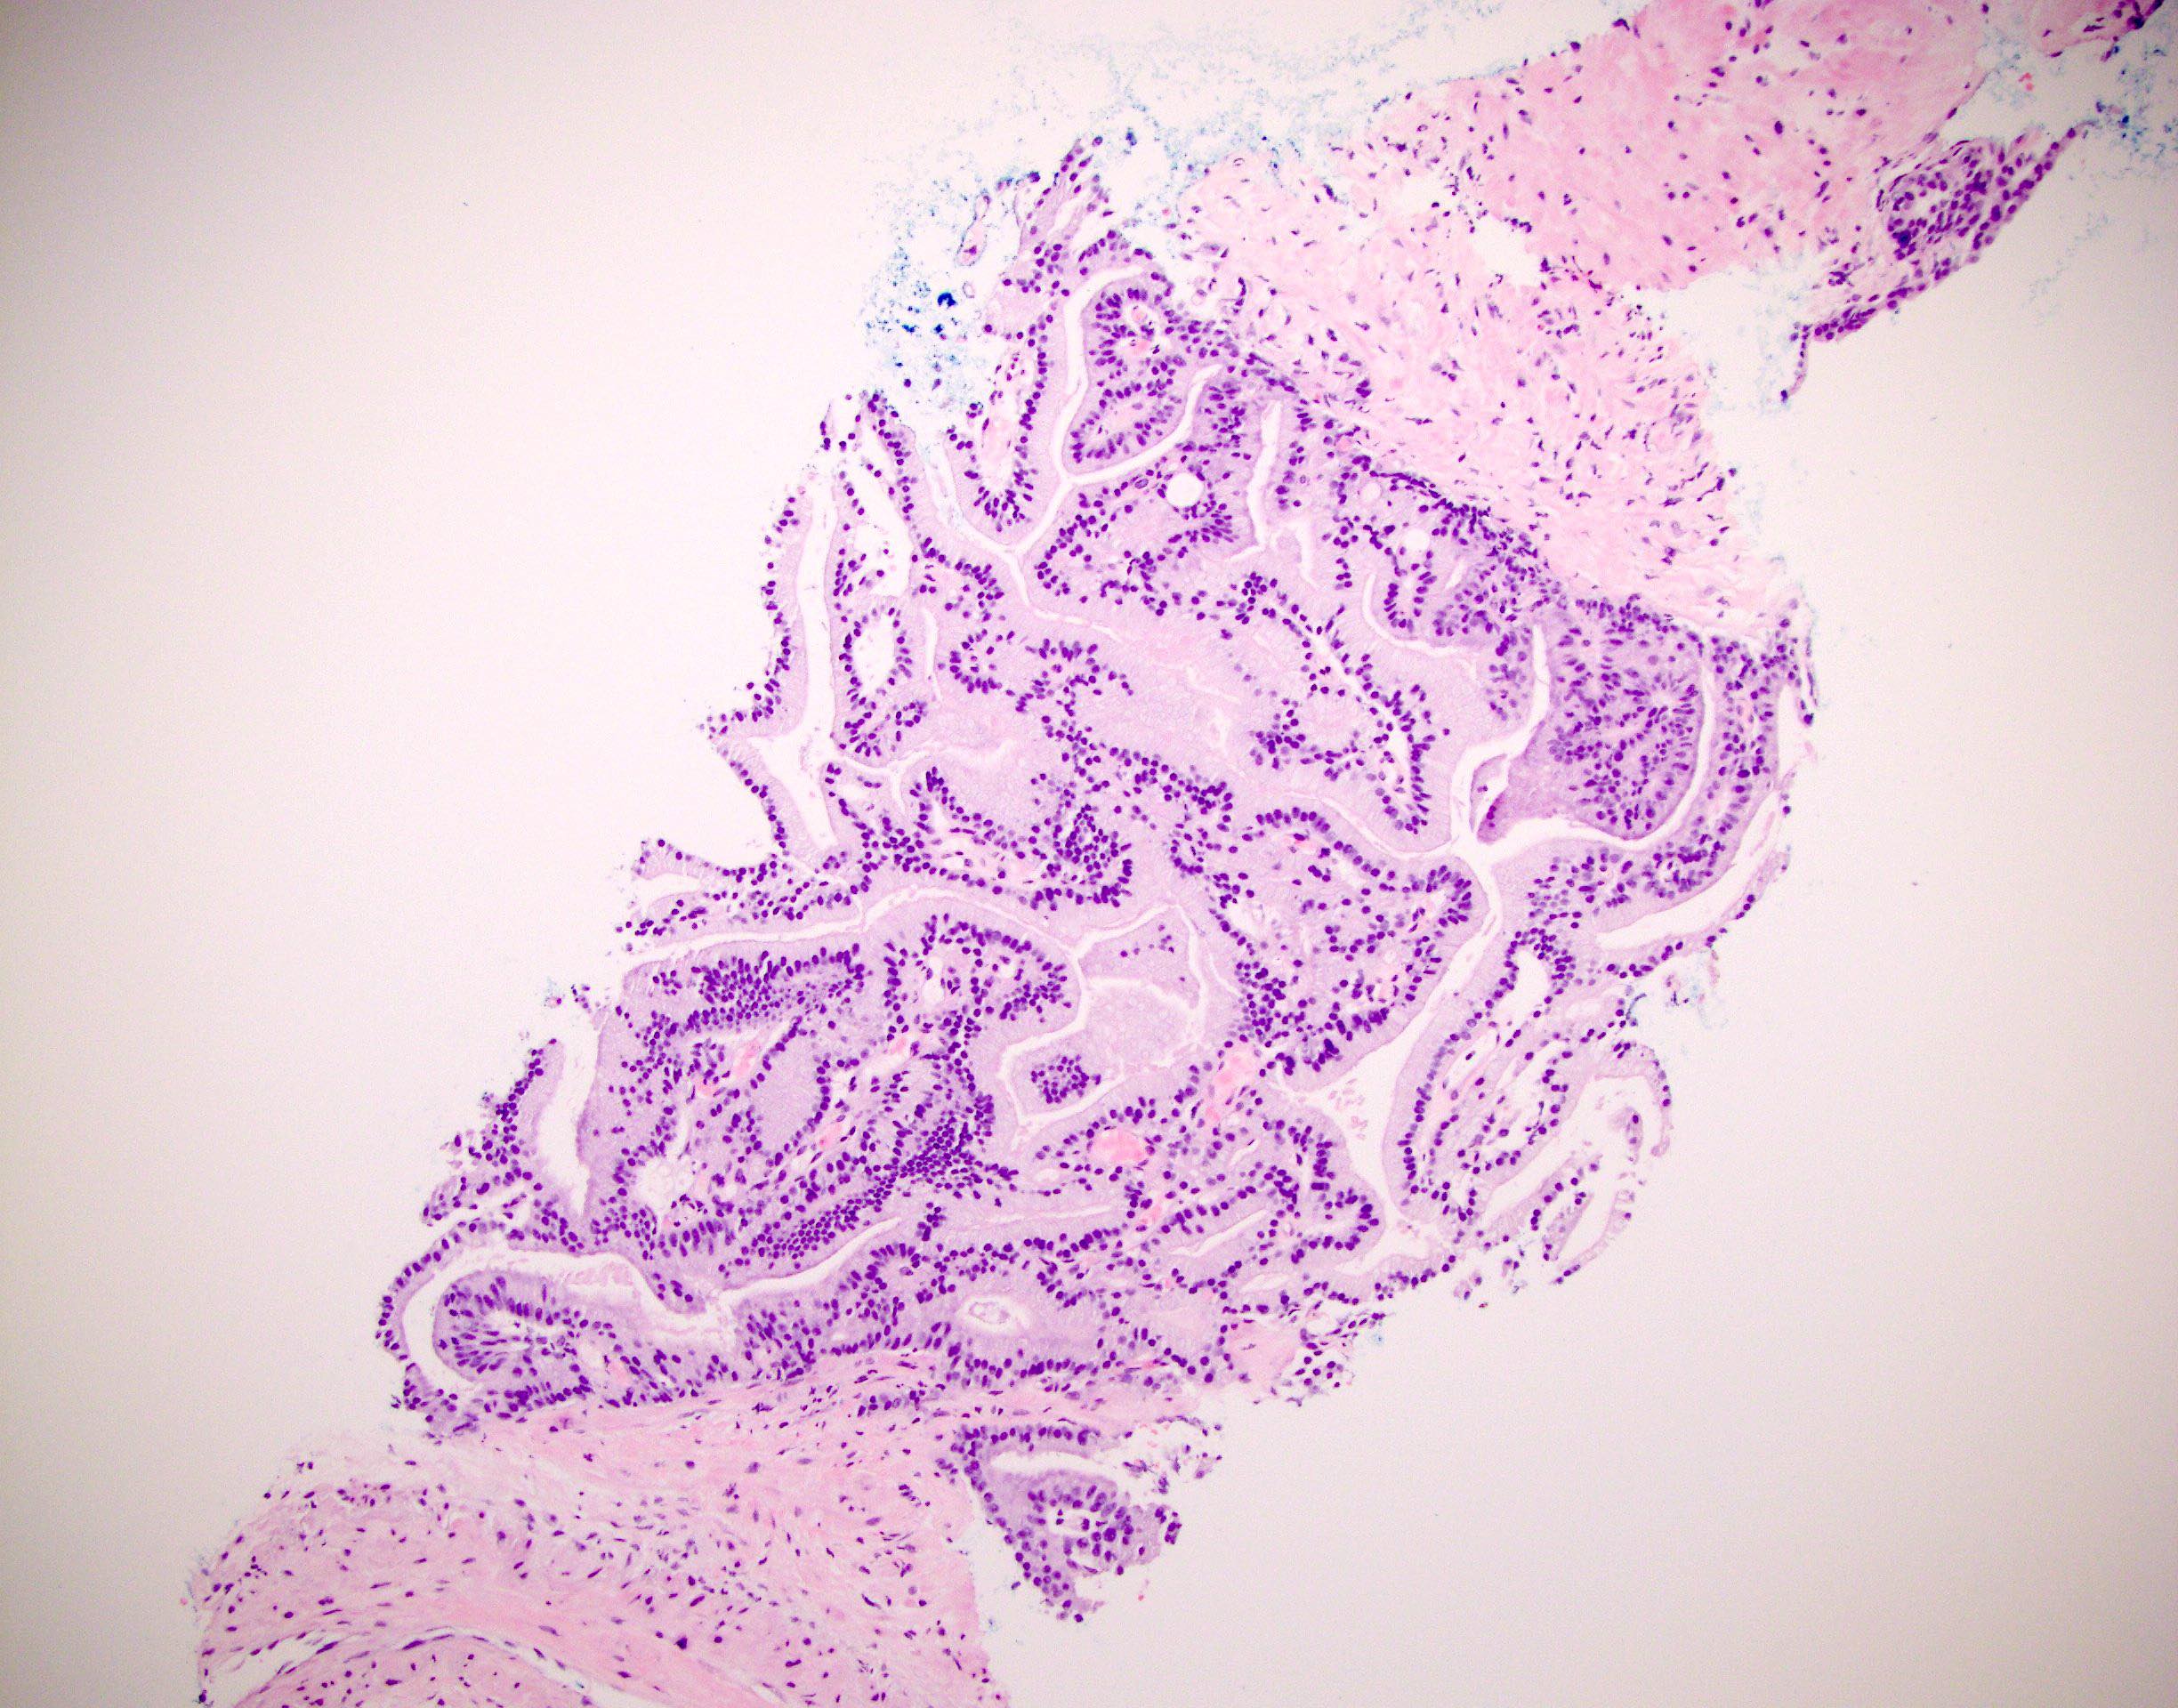 Isolated AIP on biopsy